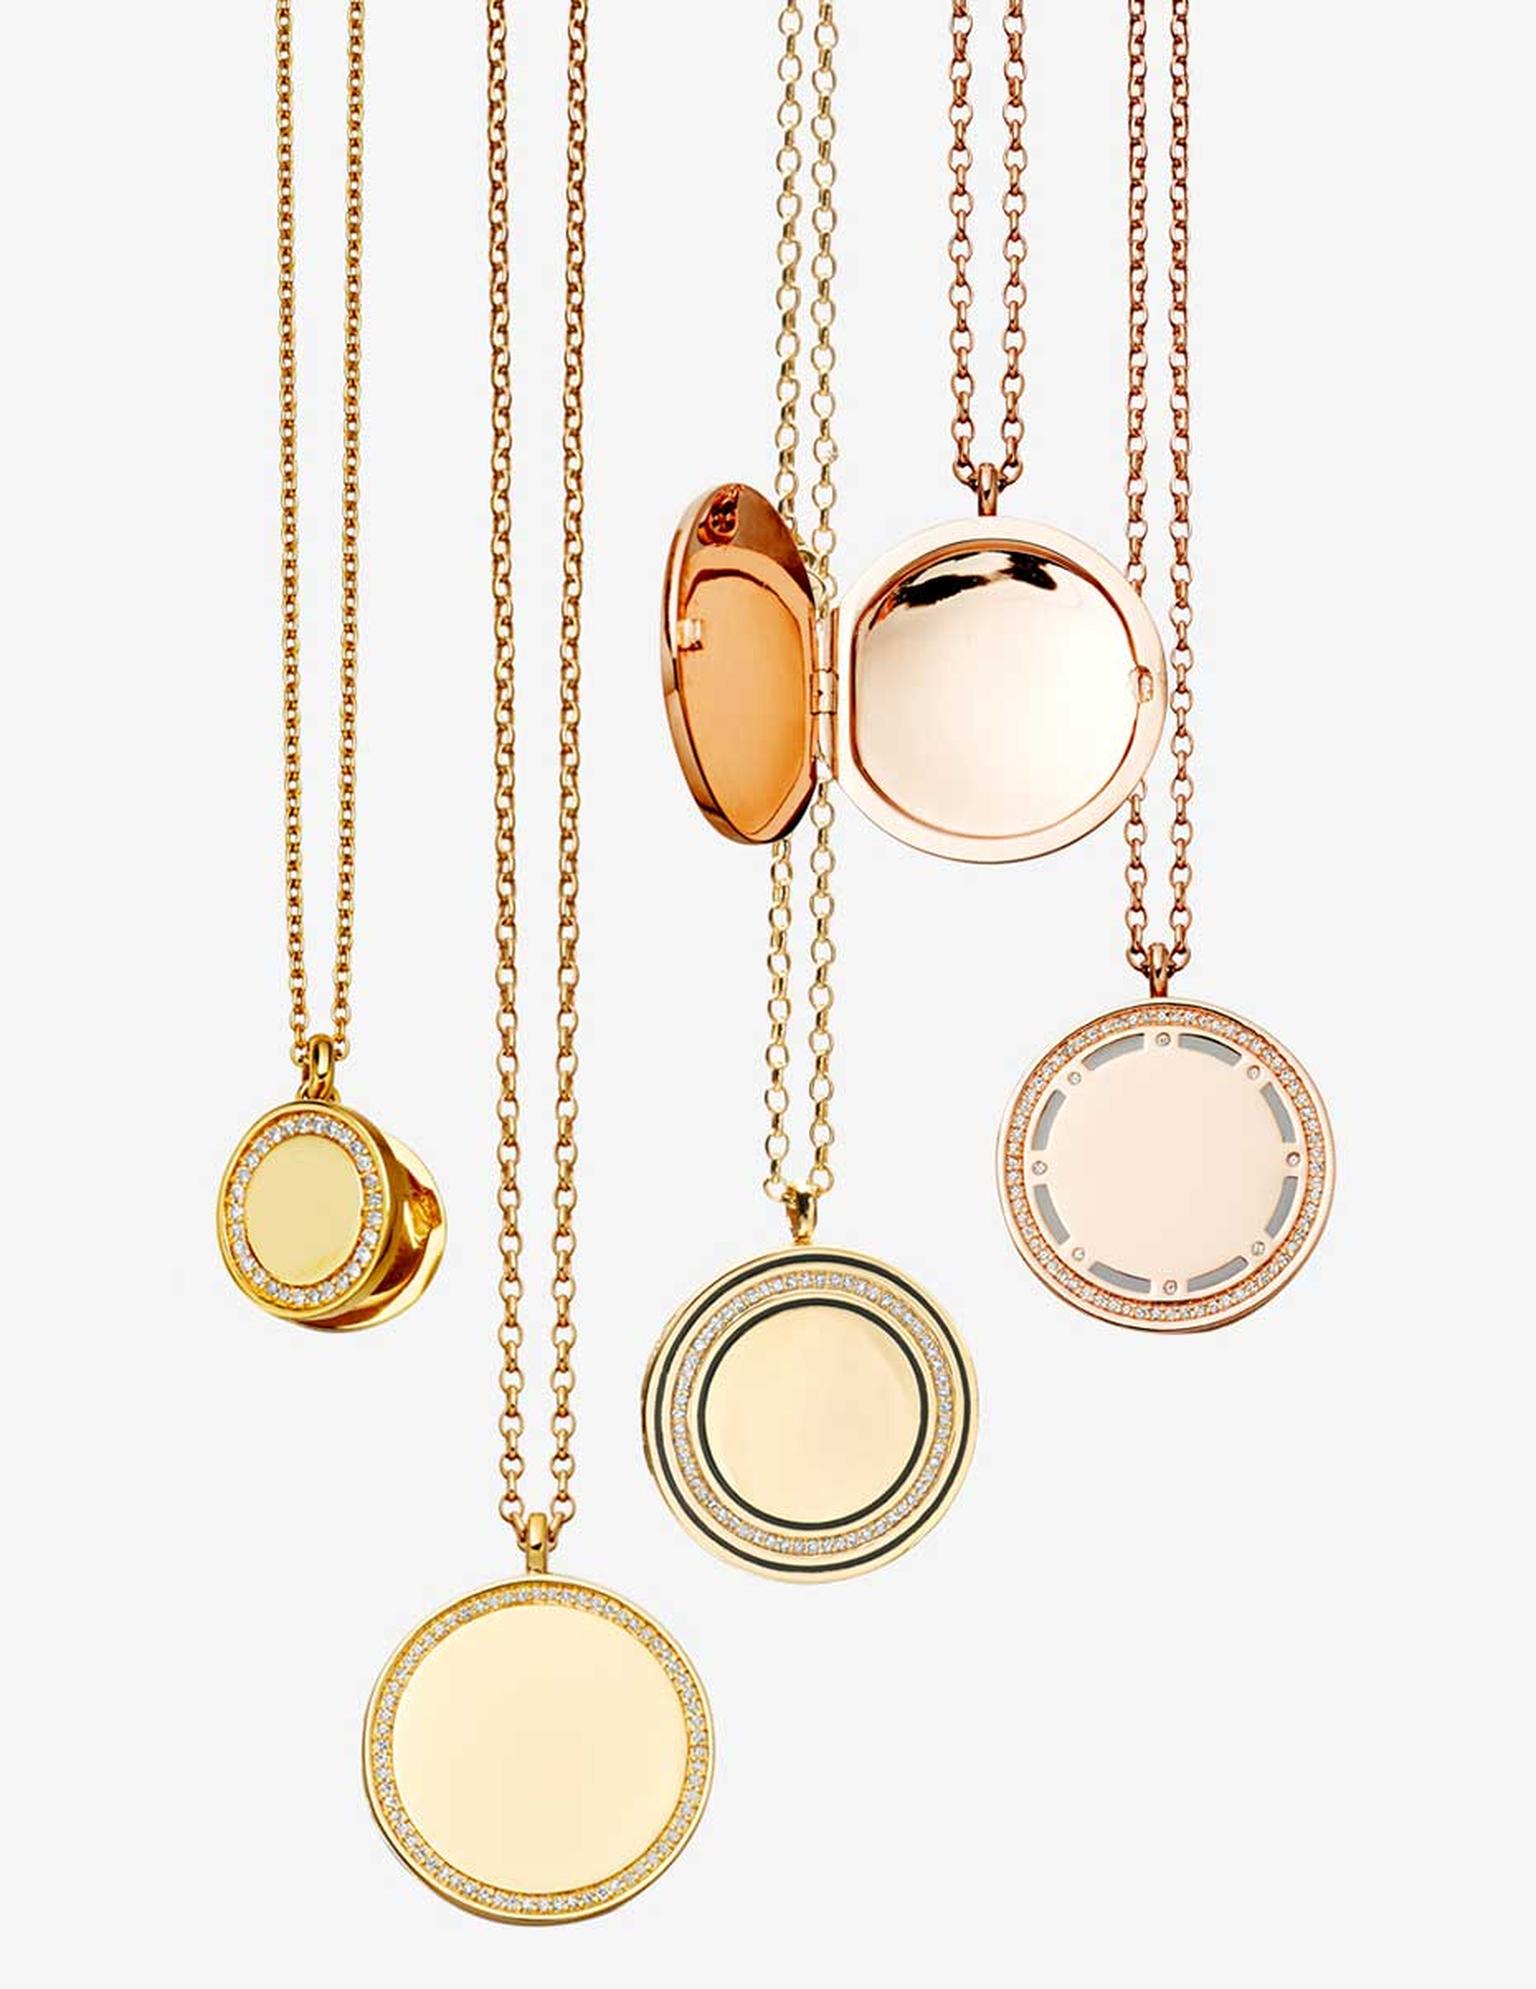 Designed in-house at its London Design Studio, Astley Clarke's new Cosmos lockets are available in either rose or yellow gold, with diamonds and embellished with enamel. The collection also includes rings and small pendants.